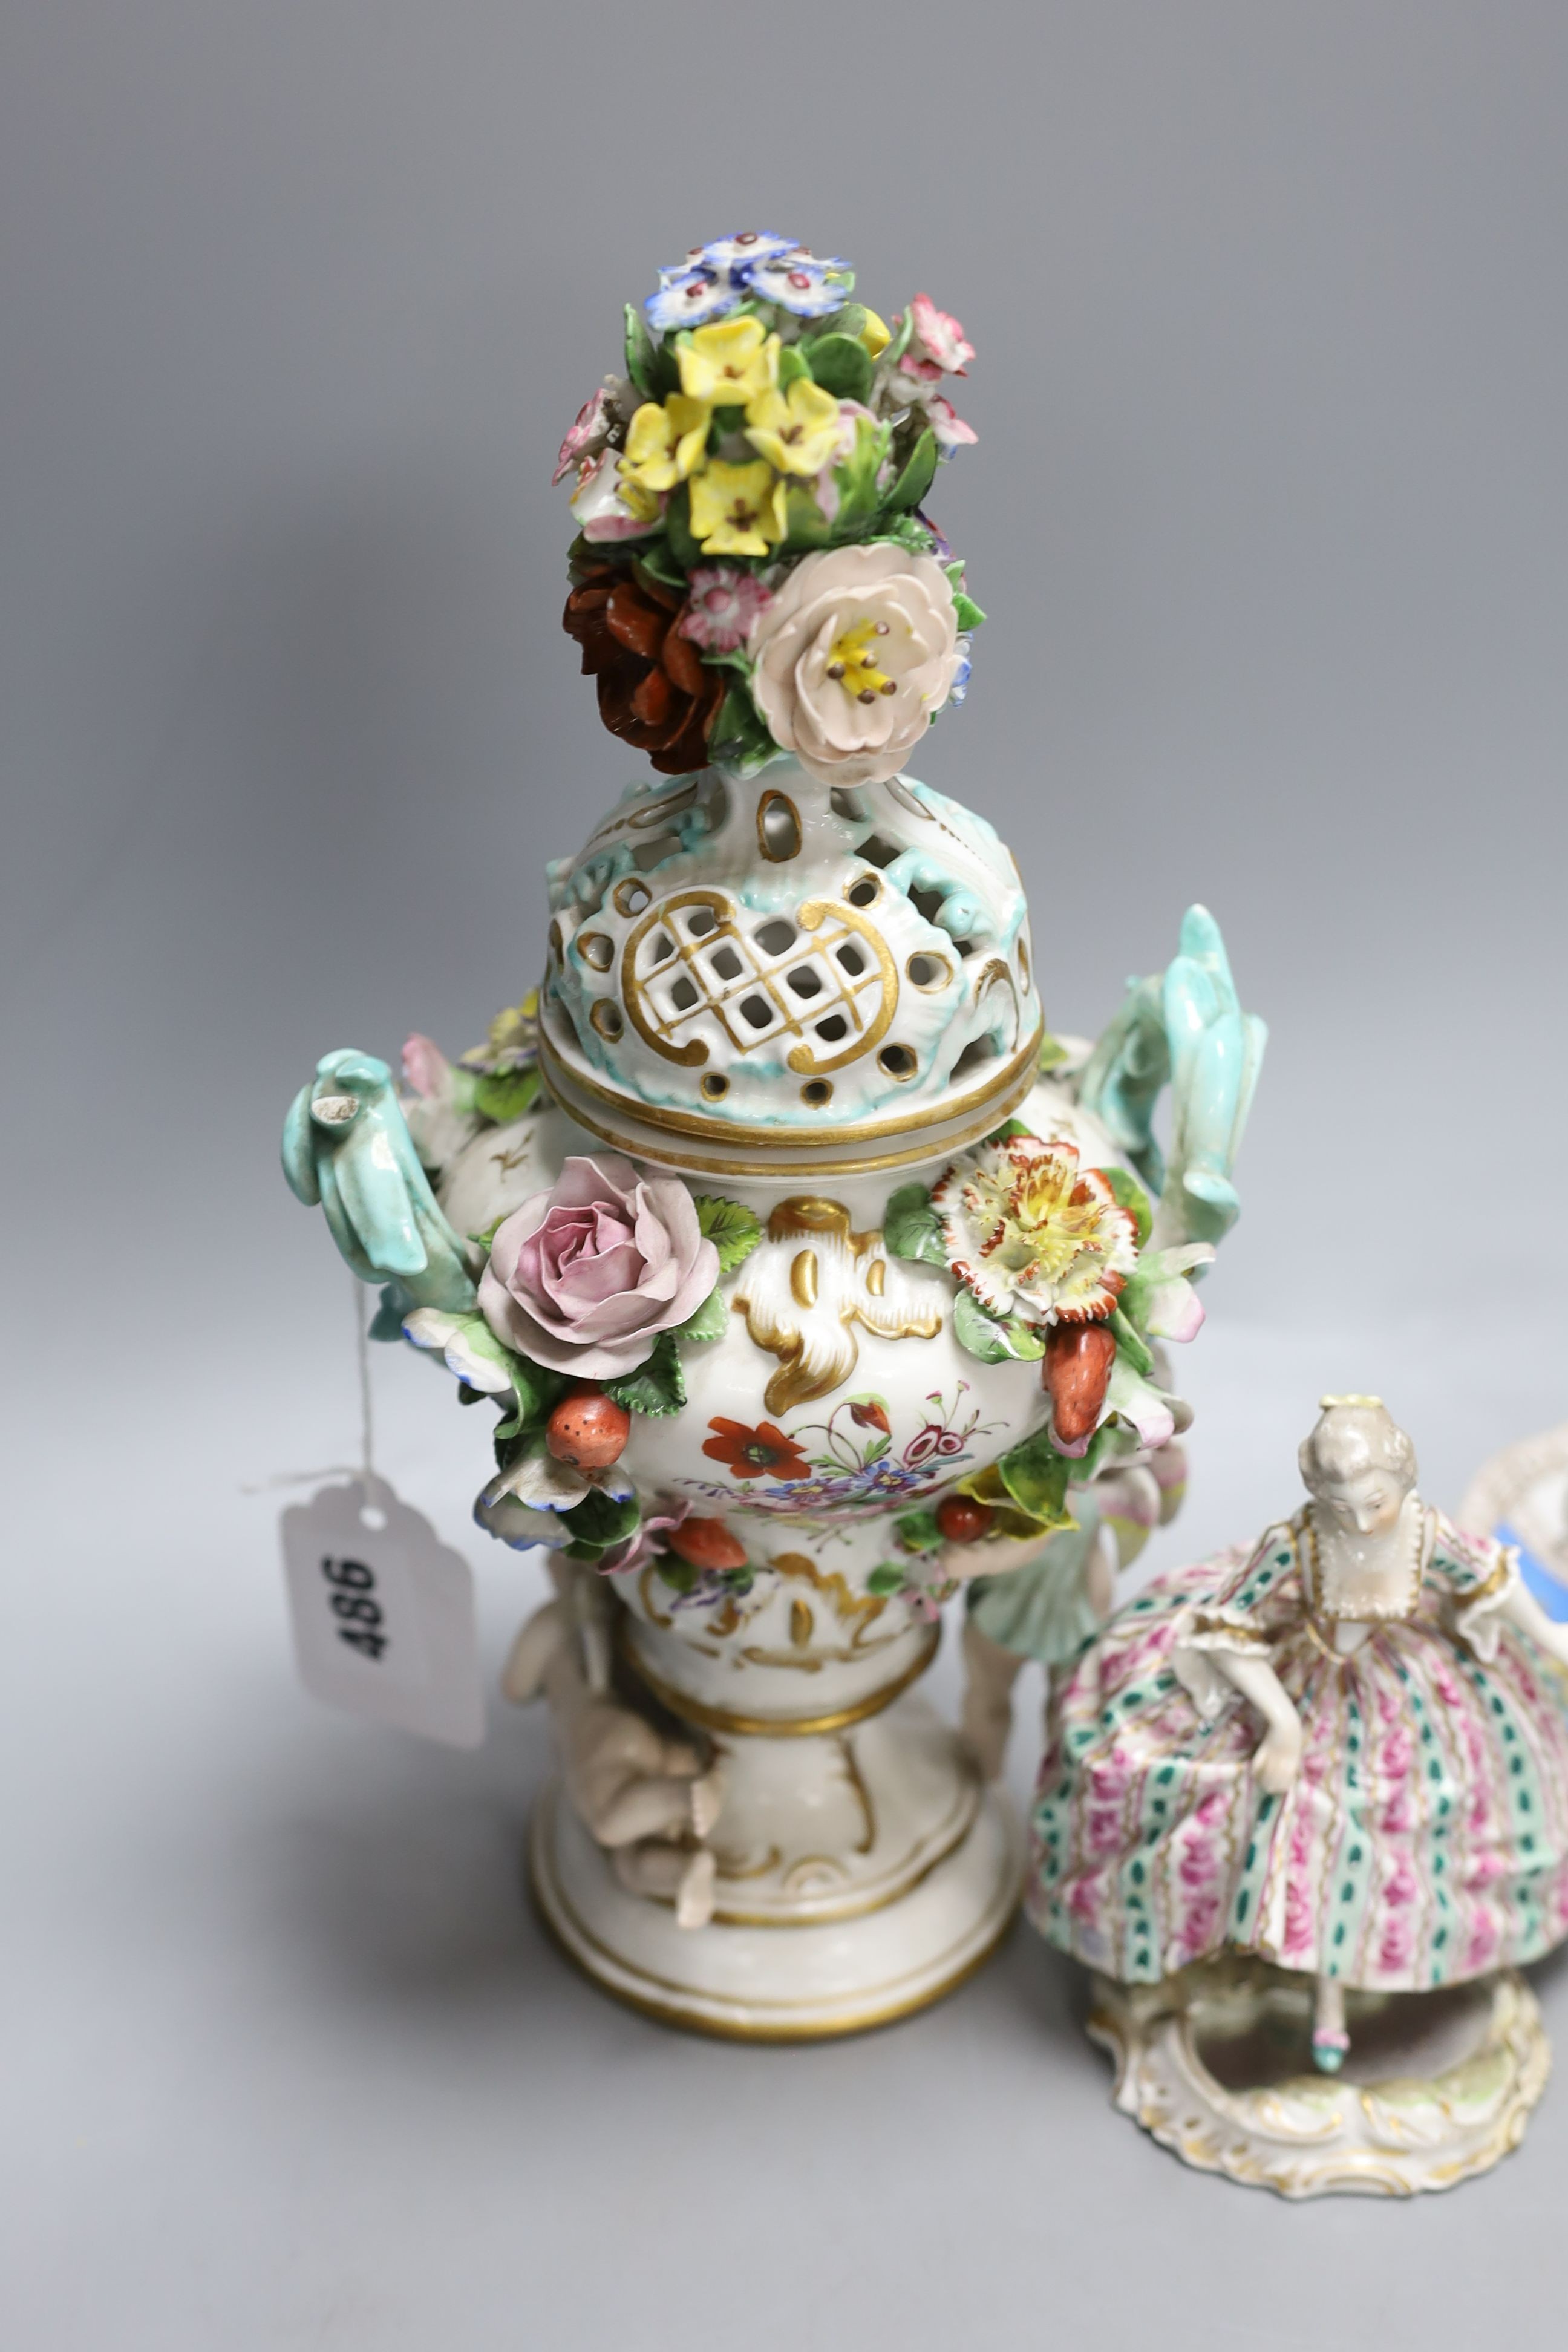 A Dresden floral encrusted pot pourri vase and cover, 29cm tall, a figure of a lady and a Dresden cup and trembleuse saucer